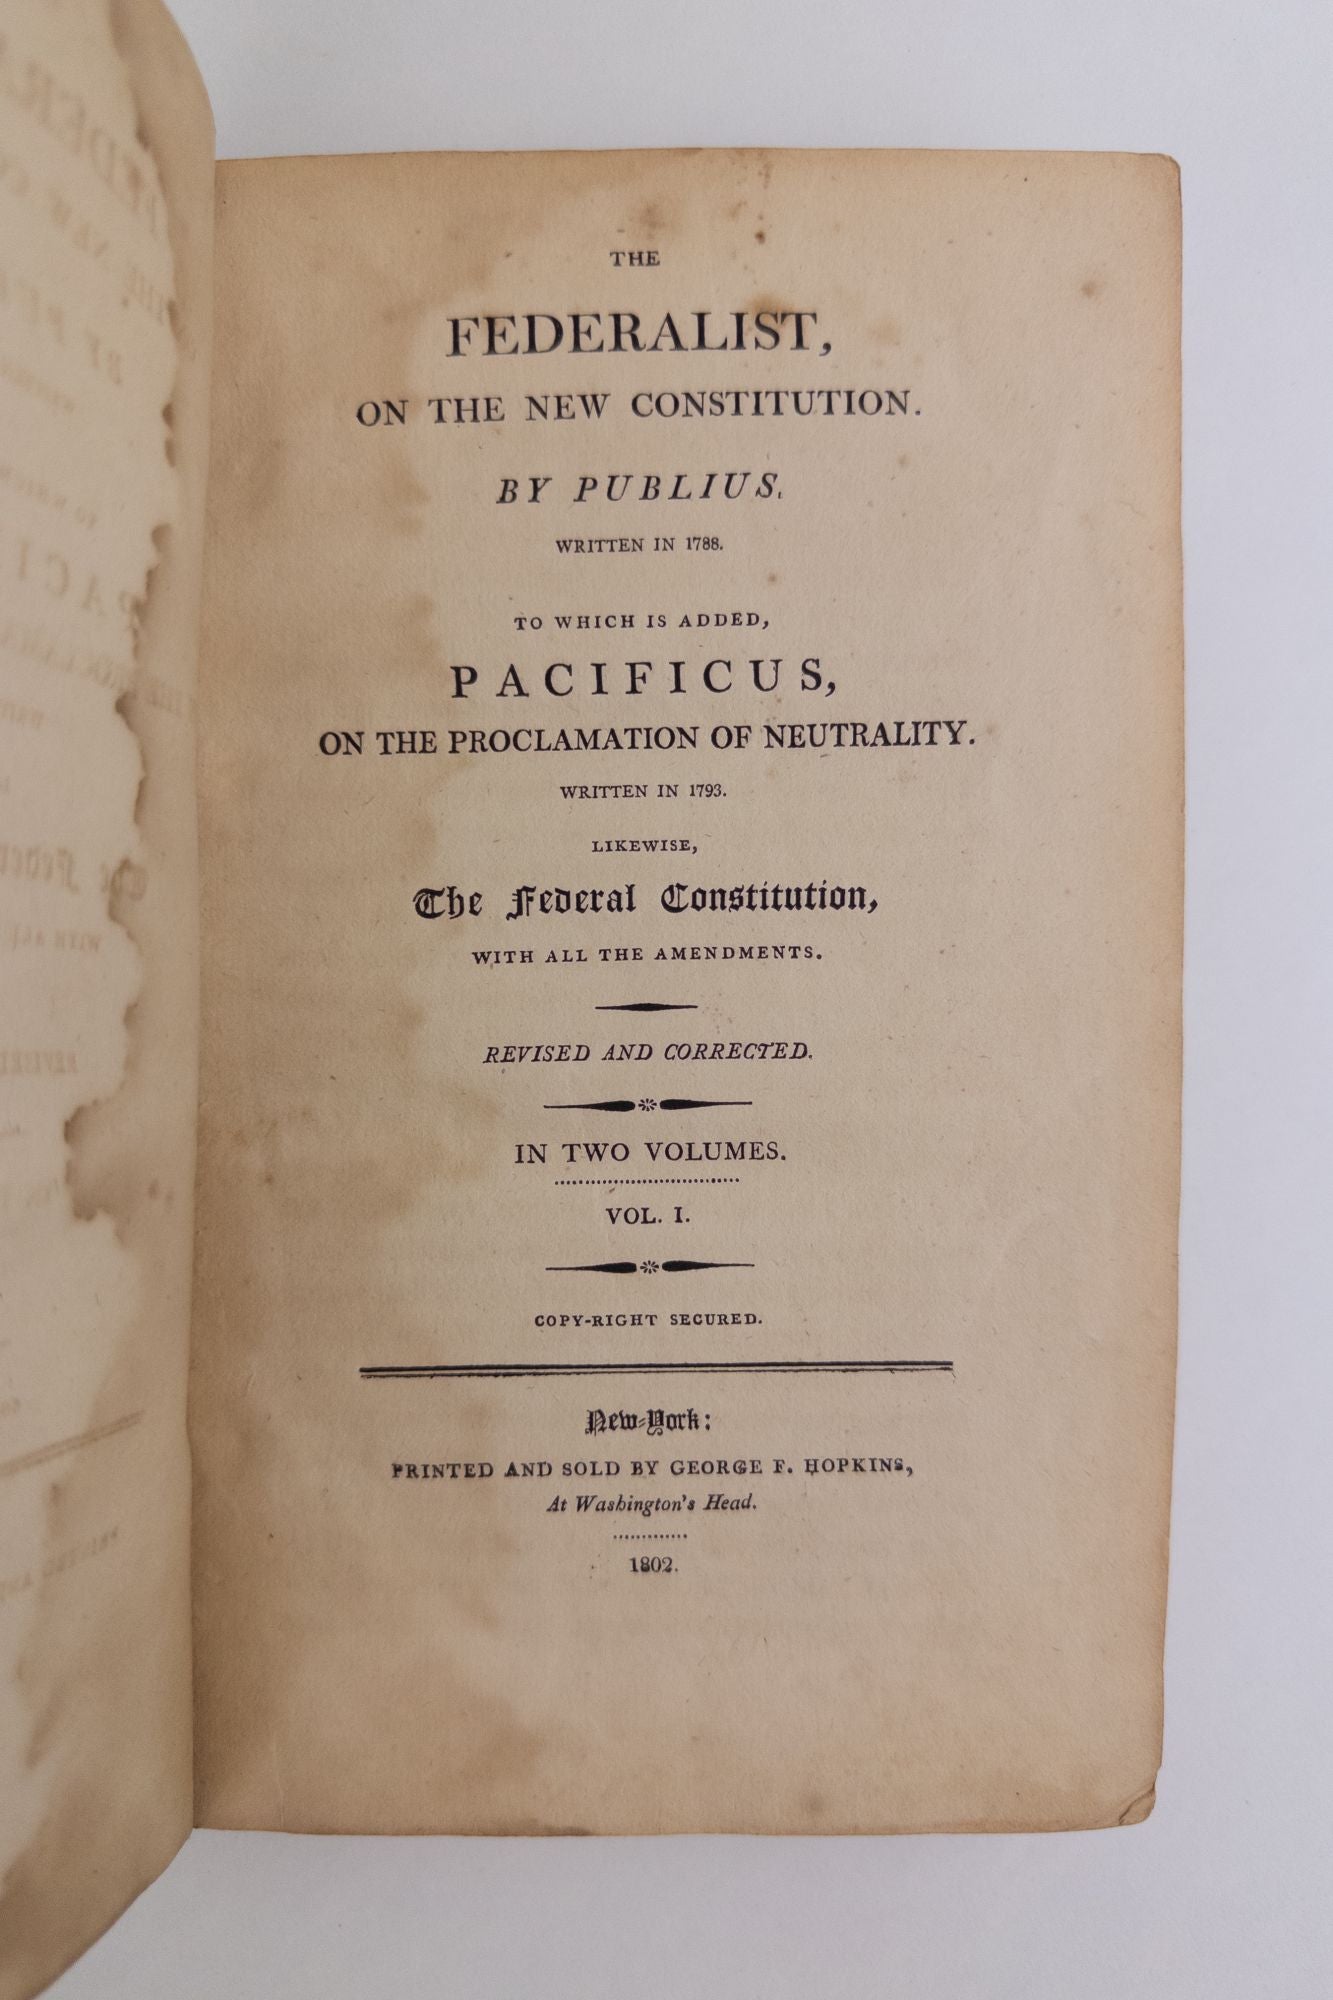 Product Image for THE FEDERALIST, ON THE NEW CONSTITUTION [TWO VOLUMES]